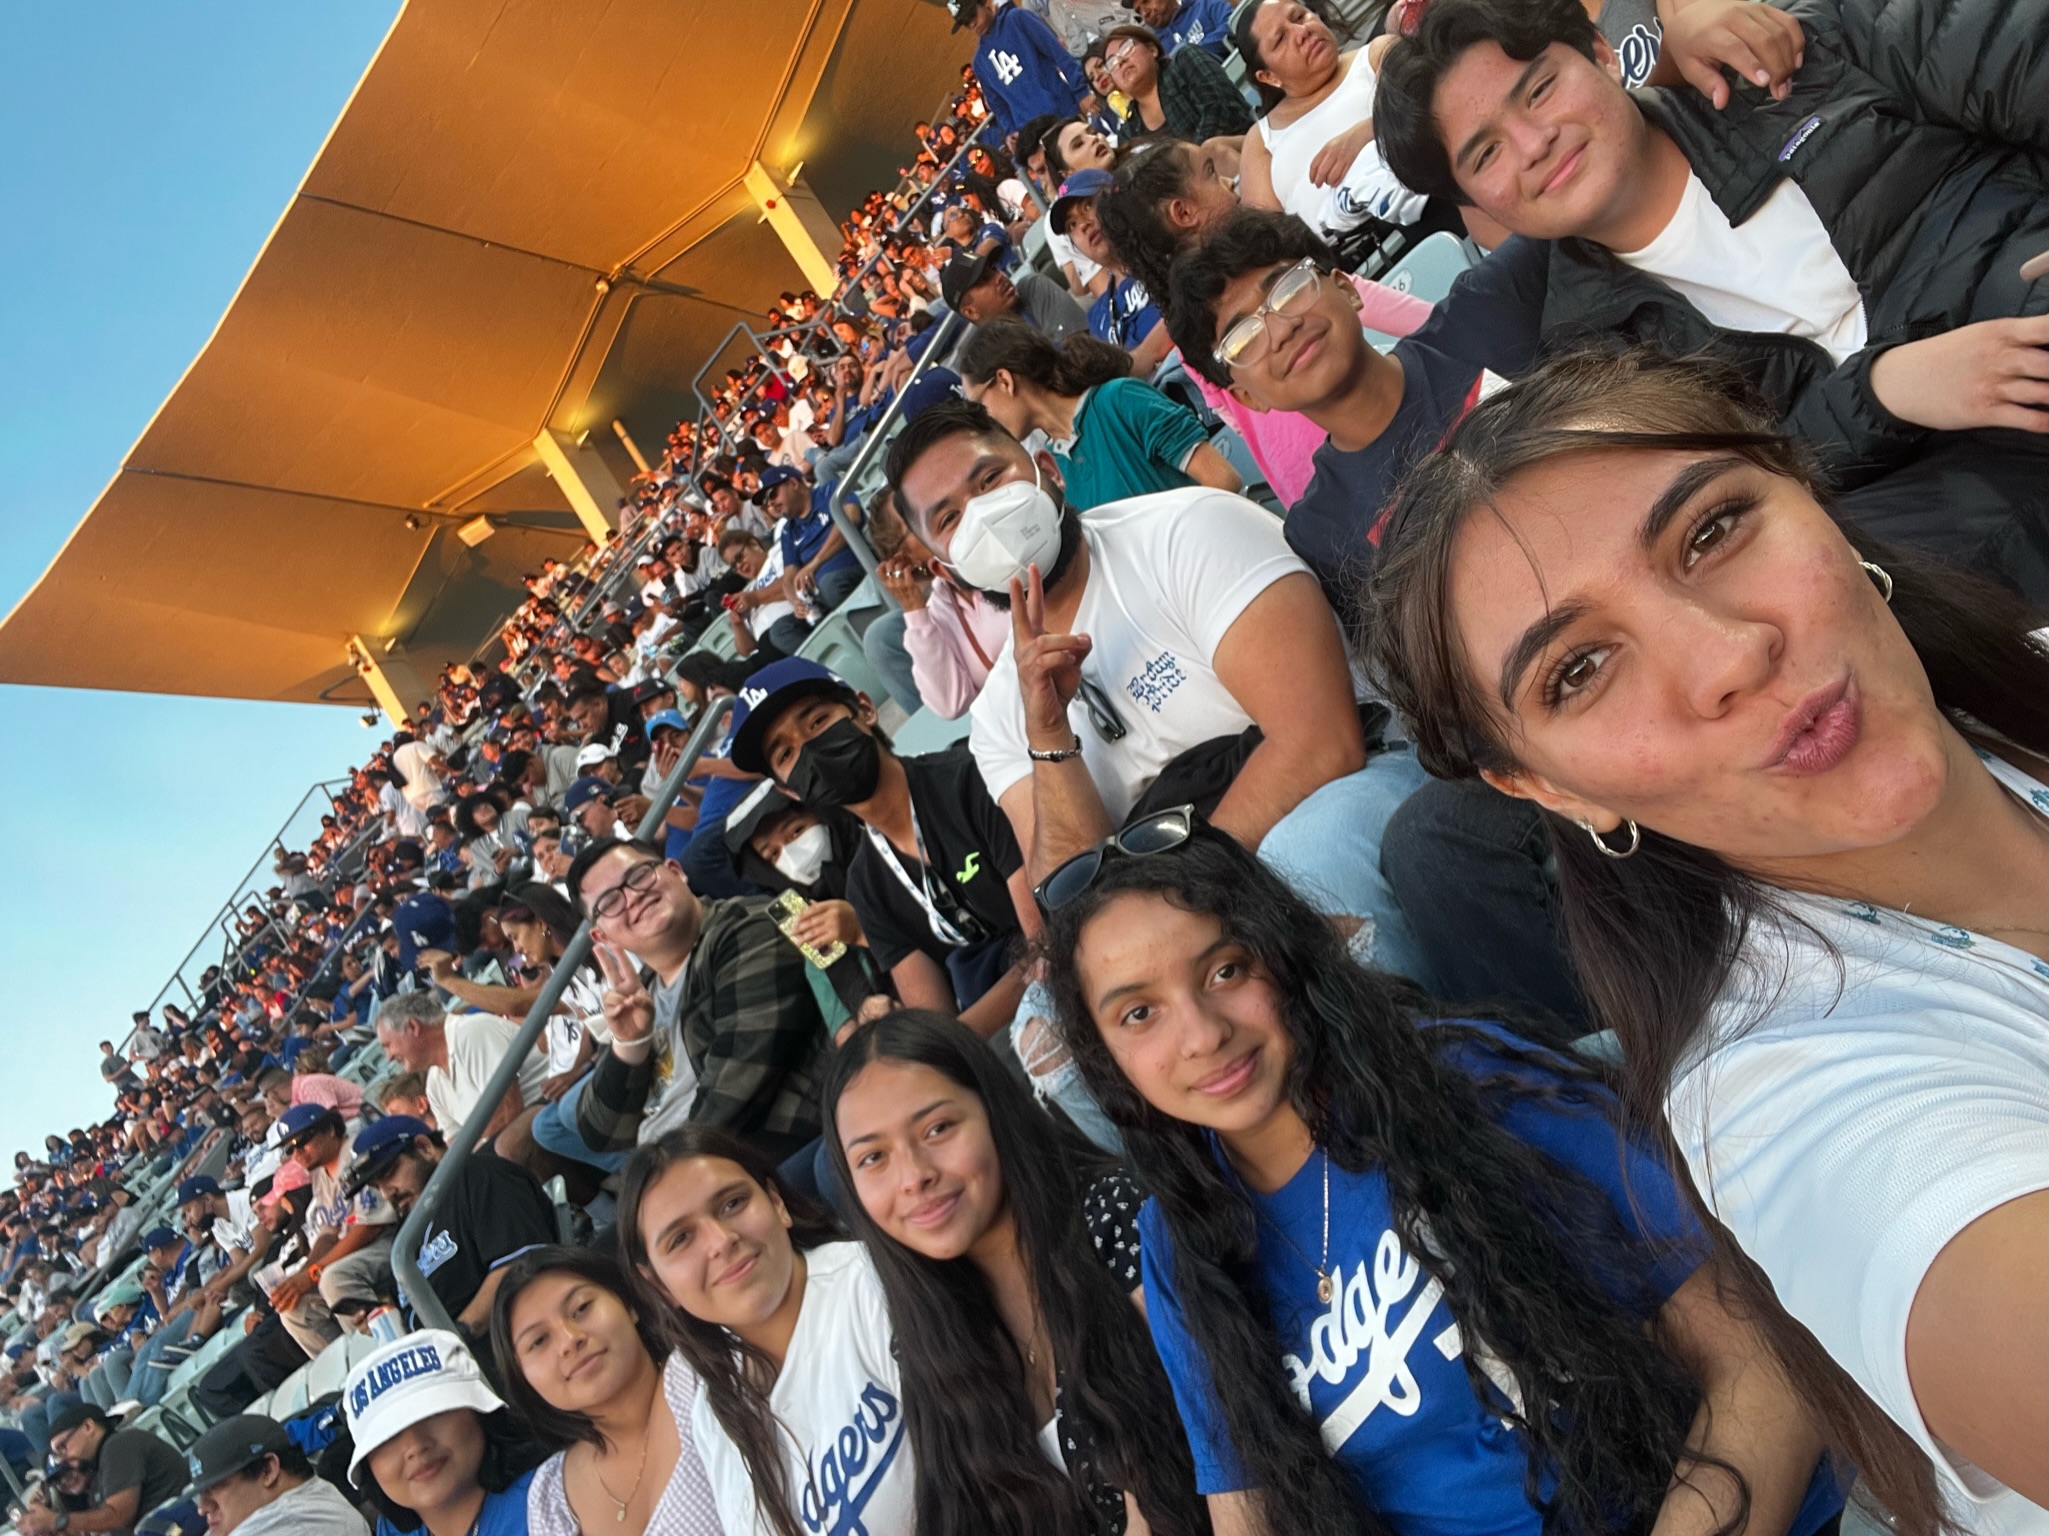 Upward Bound students and staff at a baseball game in Los Angeles, CA